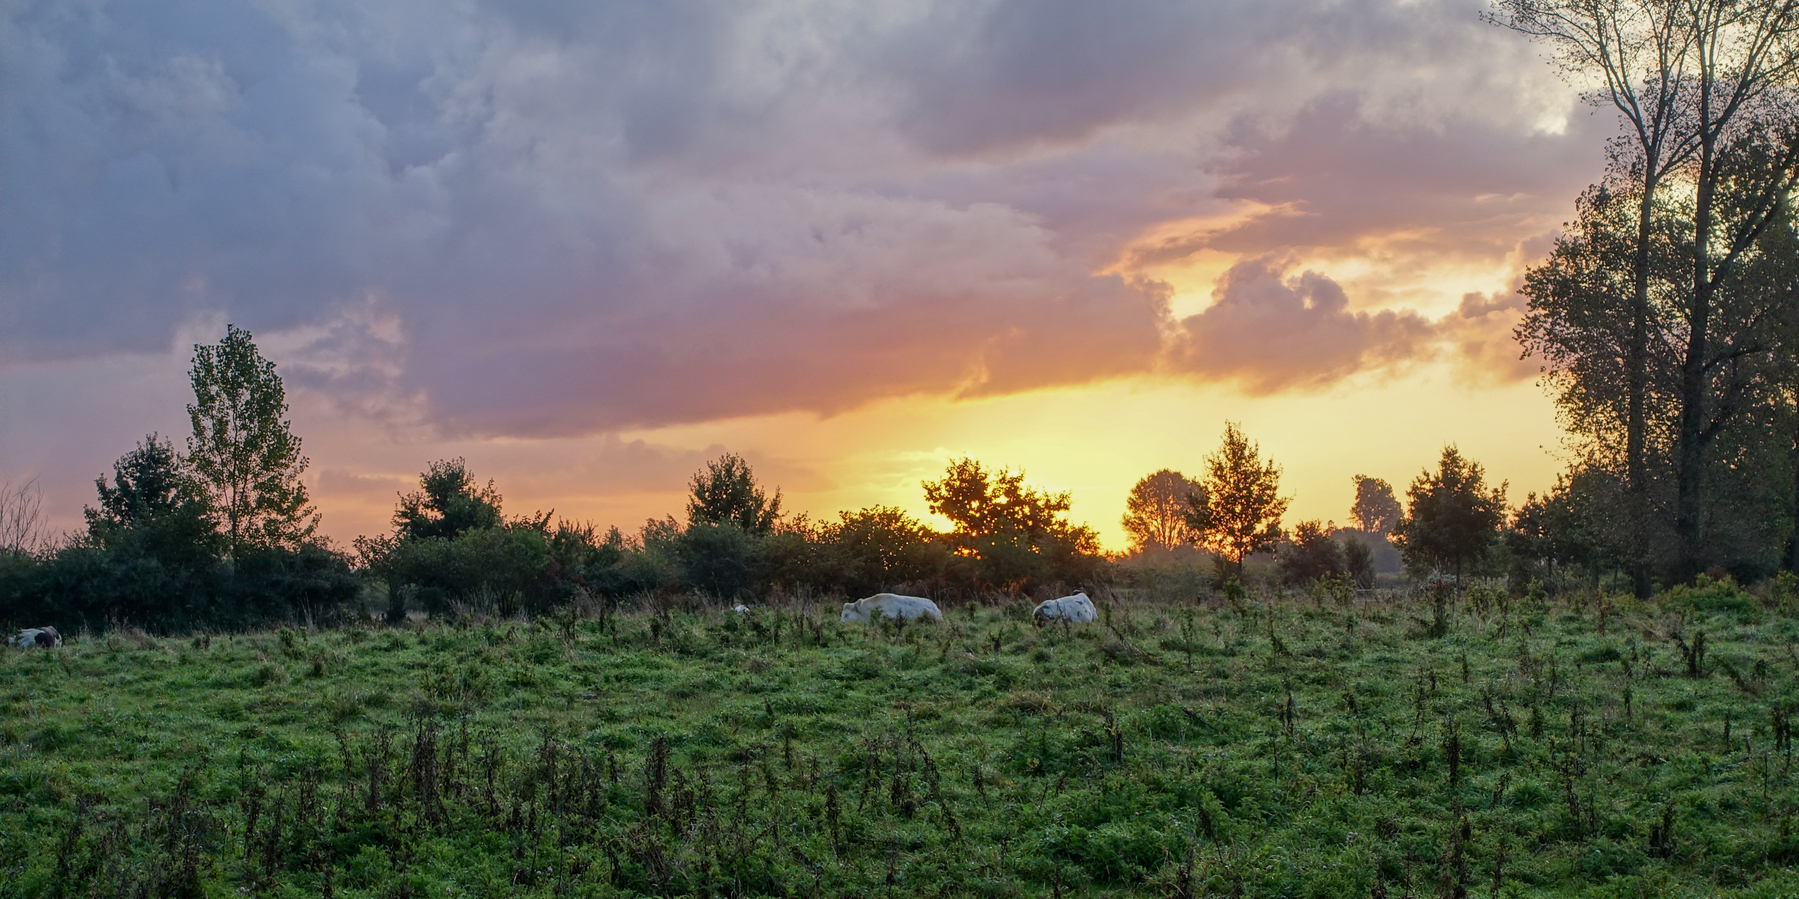 Pasture with sleeping cows under an orange sky due to the rising sun